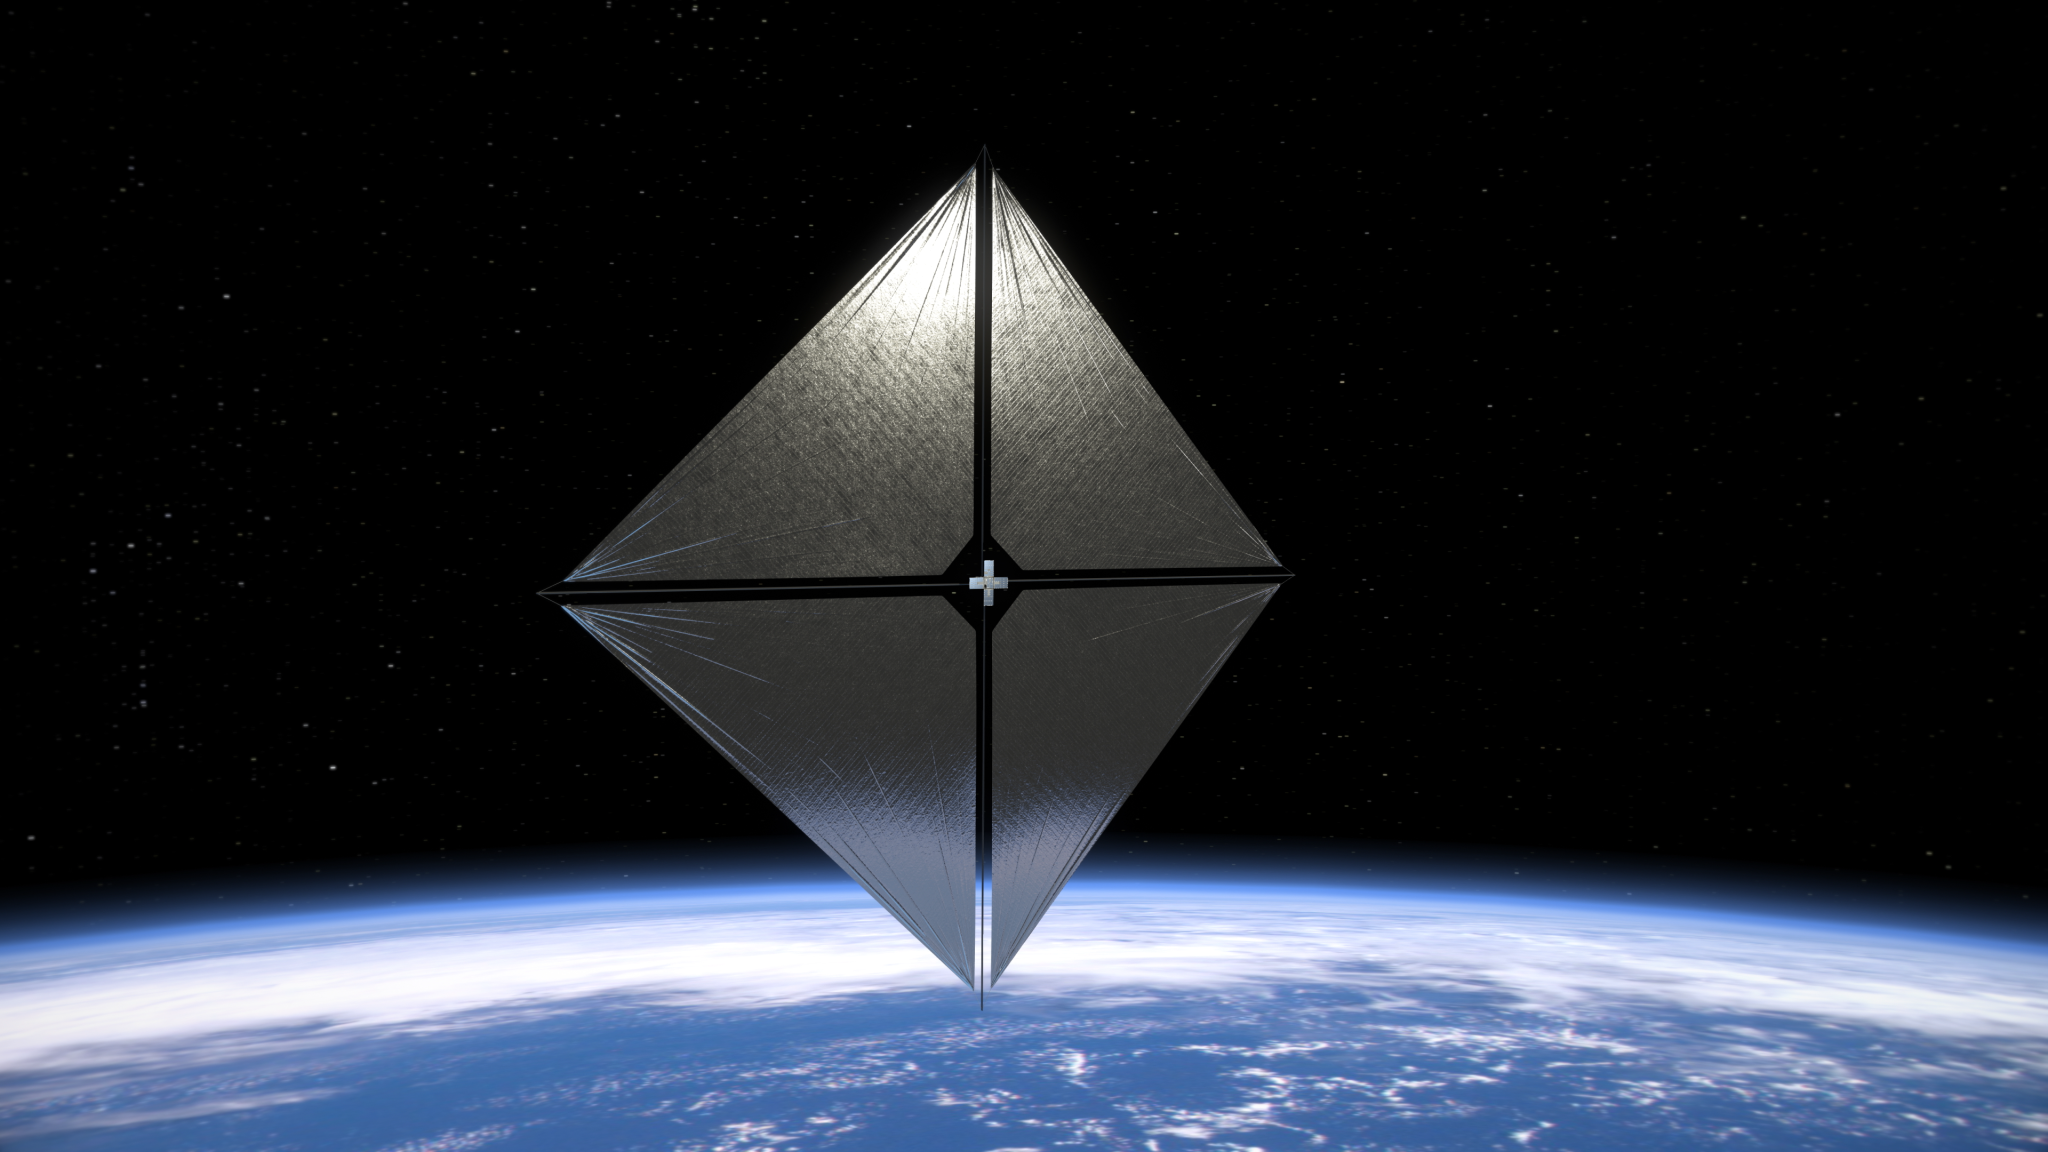 An artist's concept of NASA's Advanced Composite Solar Sail System spacecraft in orbit with the curve of the Earth visible at the bottom.